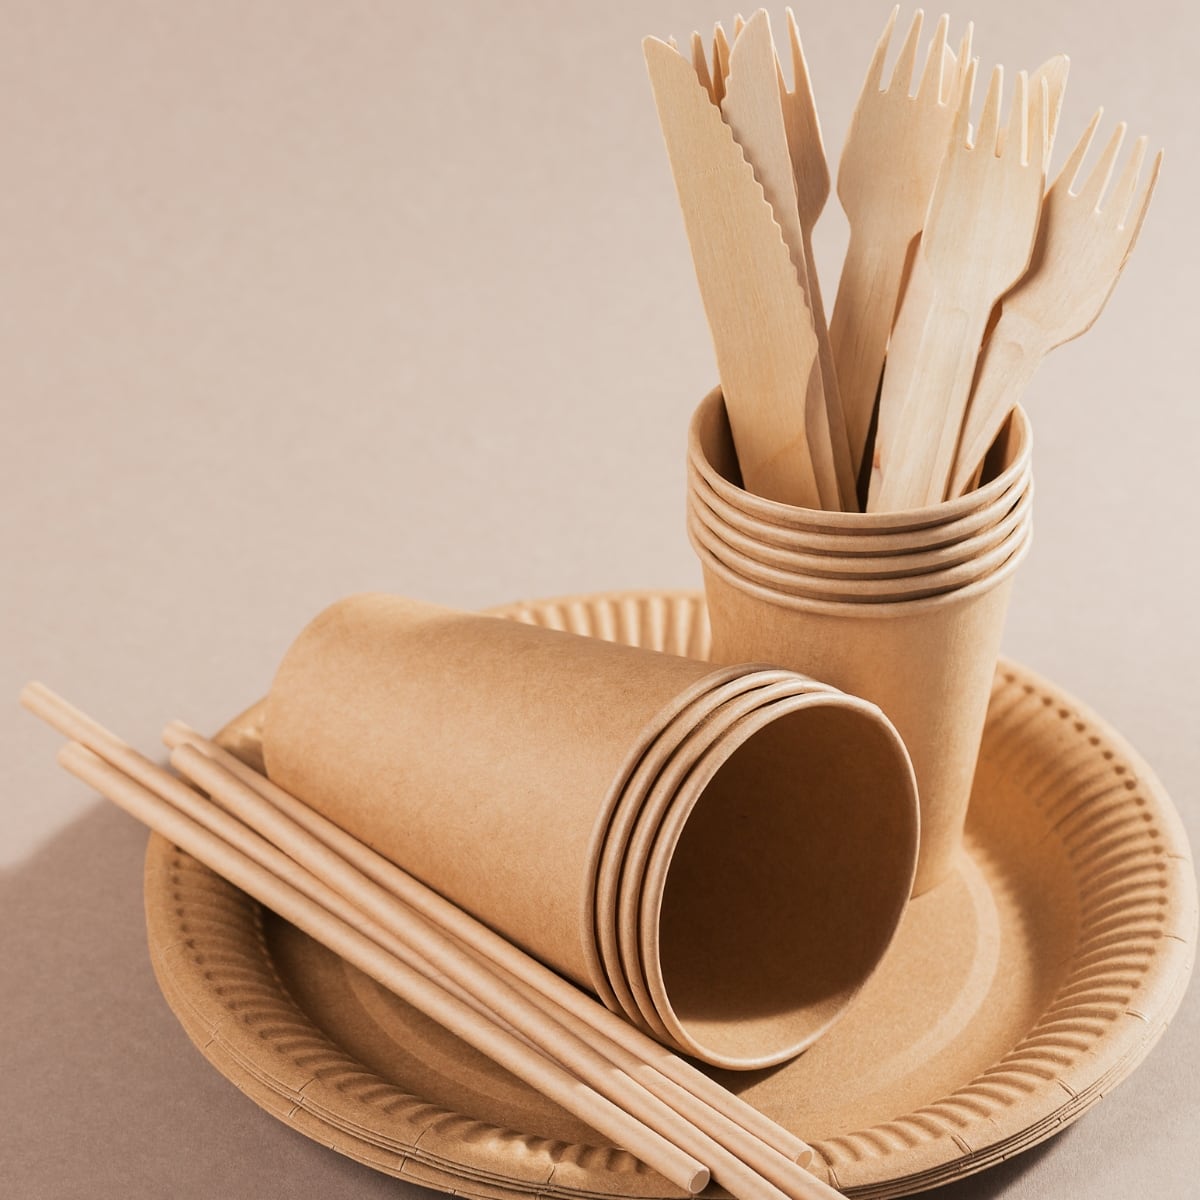 Utensils Made Form Paper and Wood